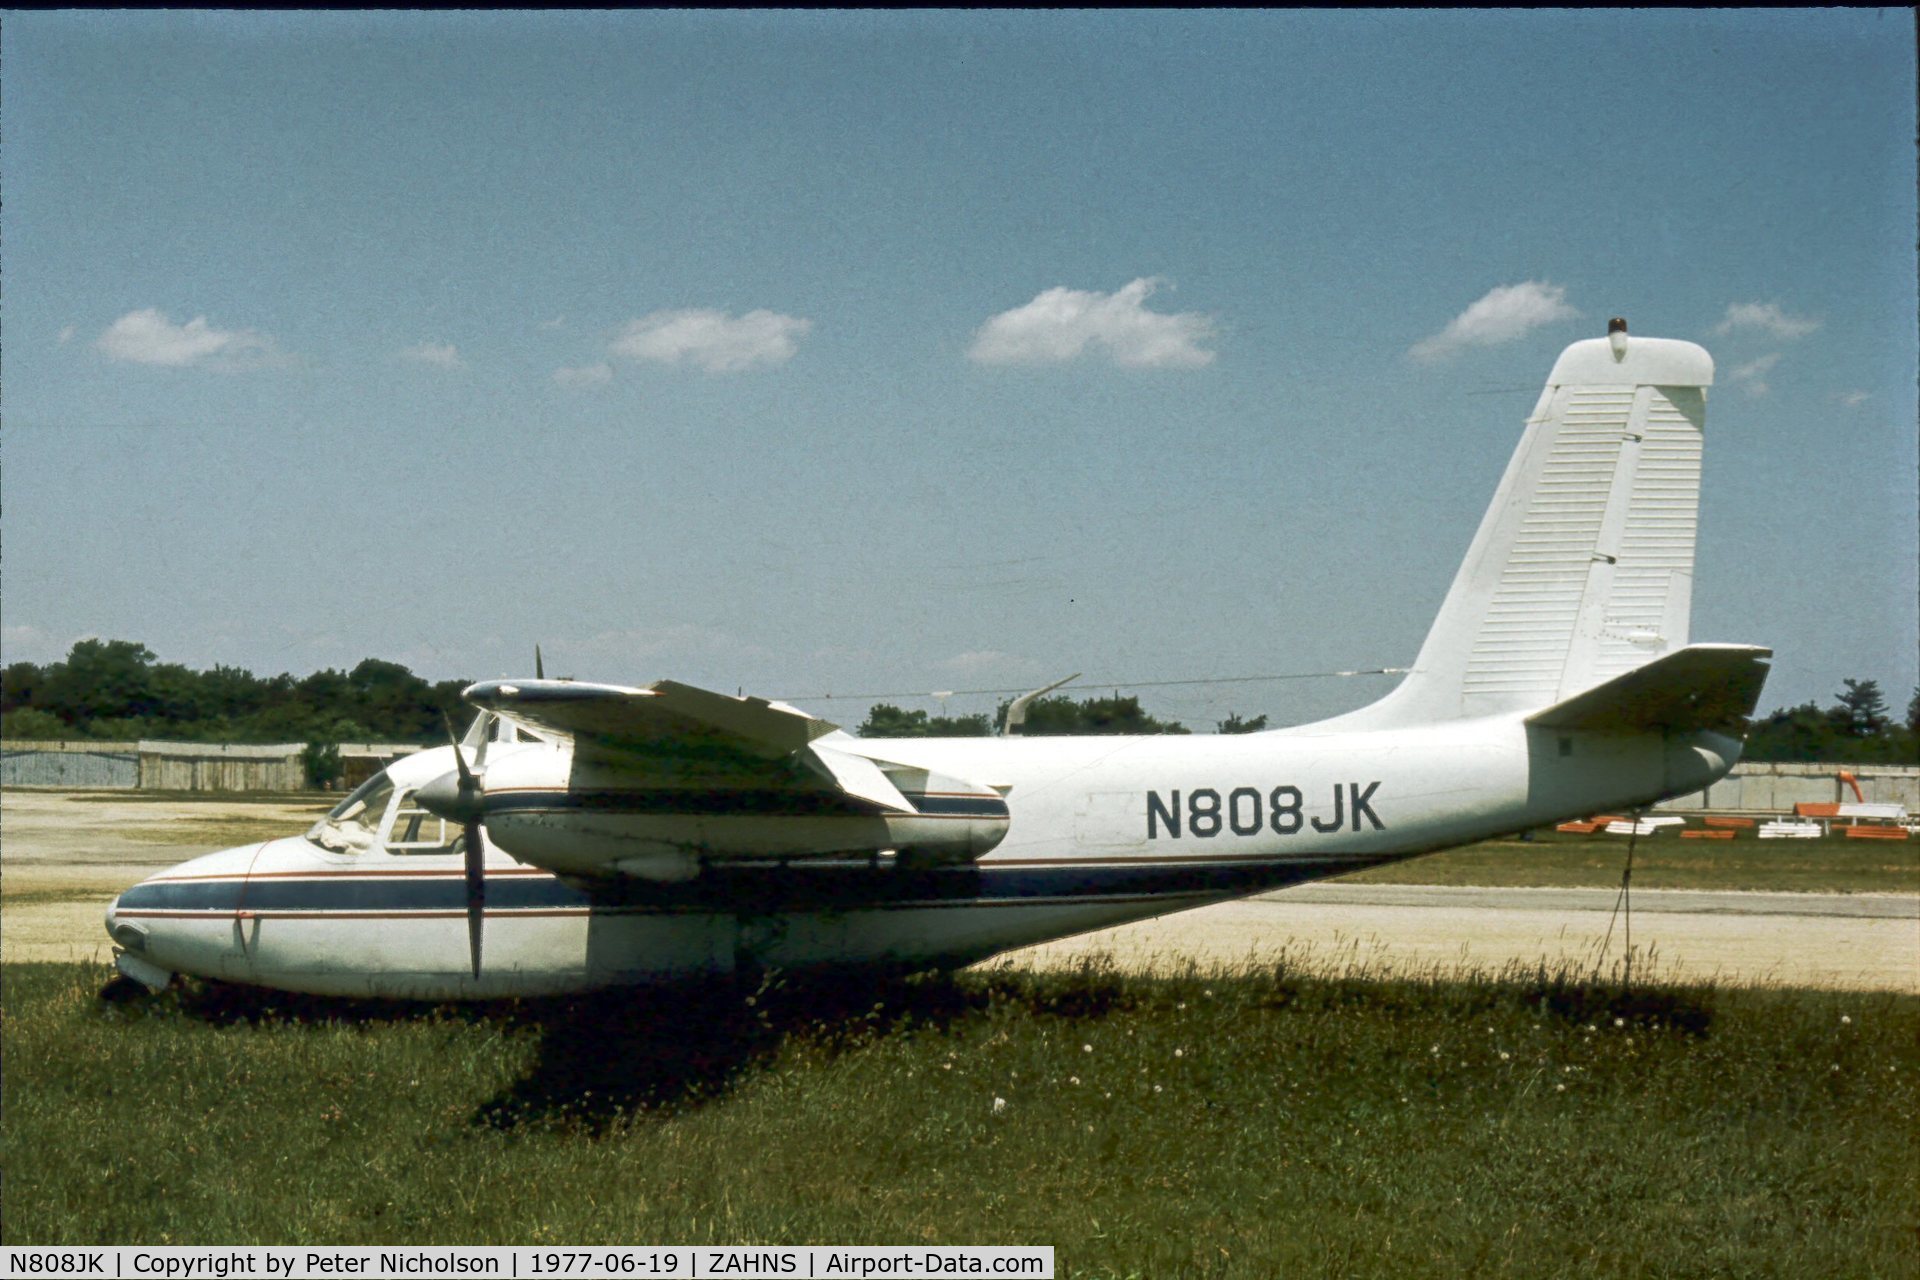 N808JK, 1954 Aero Commander 560 C/N 151, This Aero Commander was seen at Zahns Airport, Amityville NY in the Summer of 1977 - airfield later closed in 1980.